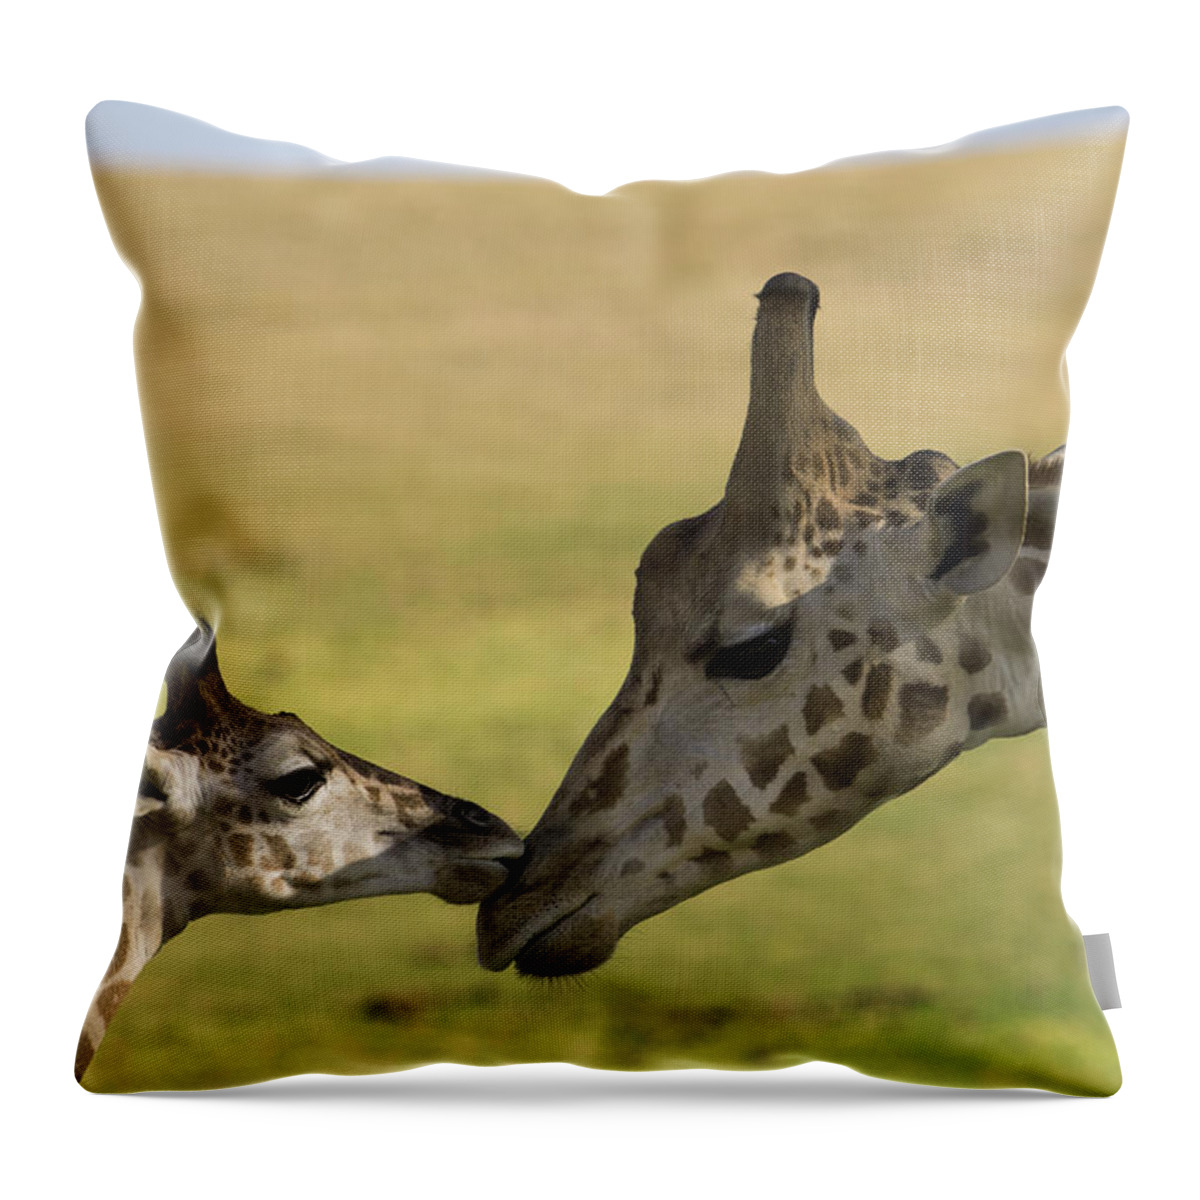 San Diego Zoo Throw Pillow featuring the photograph Rothschild Giraffe Male Calf Nuzzling by San Diego Zoo